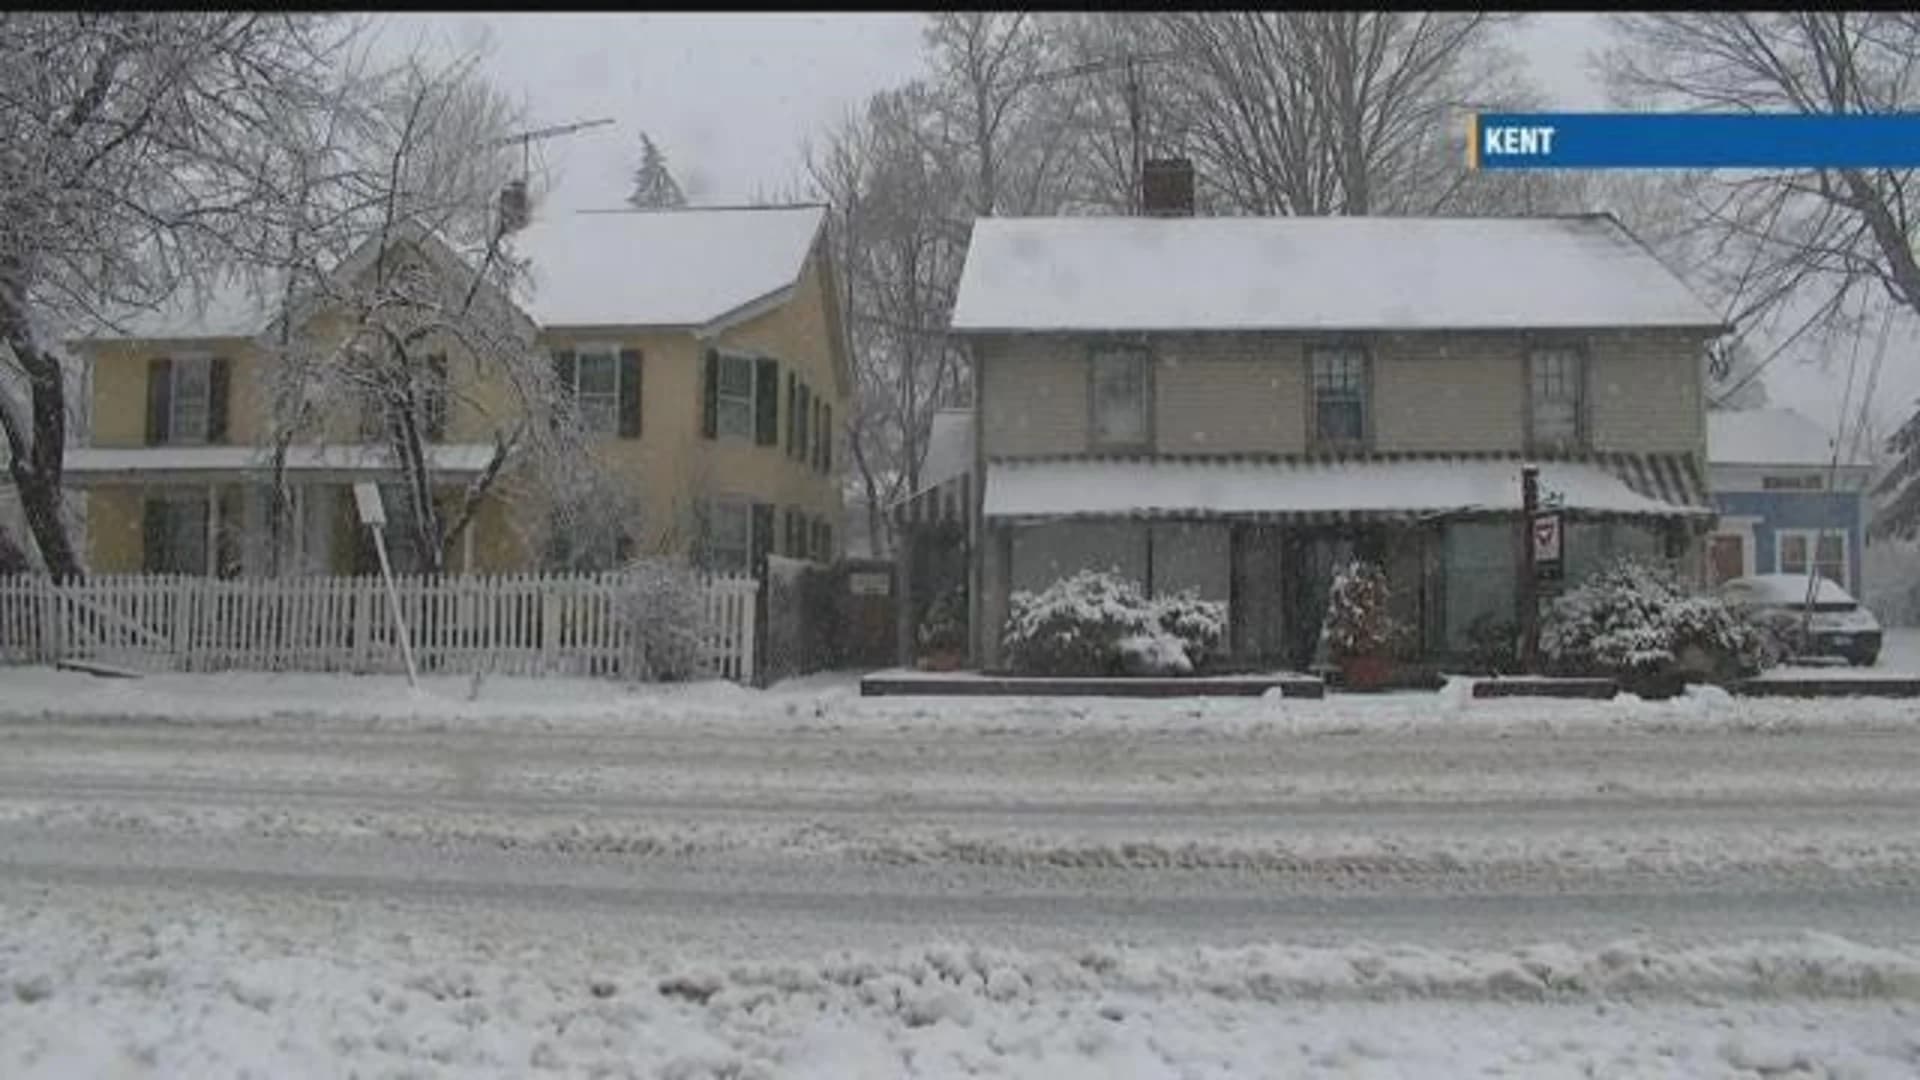 Nor'easter brings snow, high winds to Kent